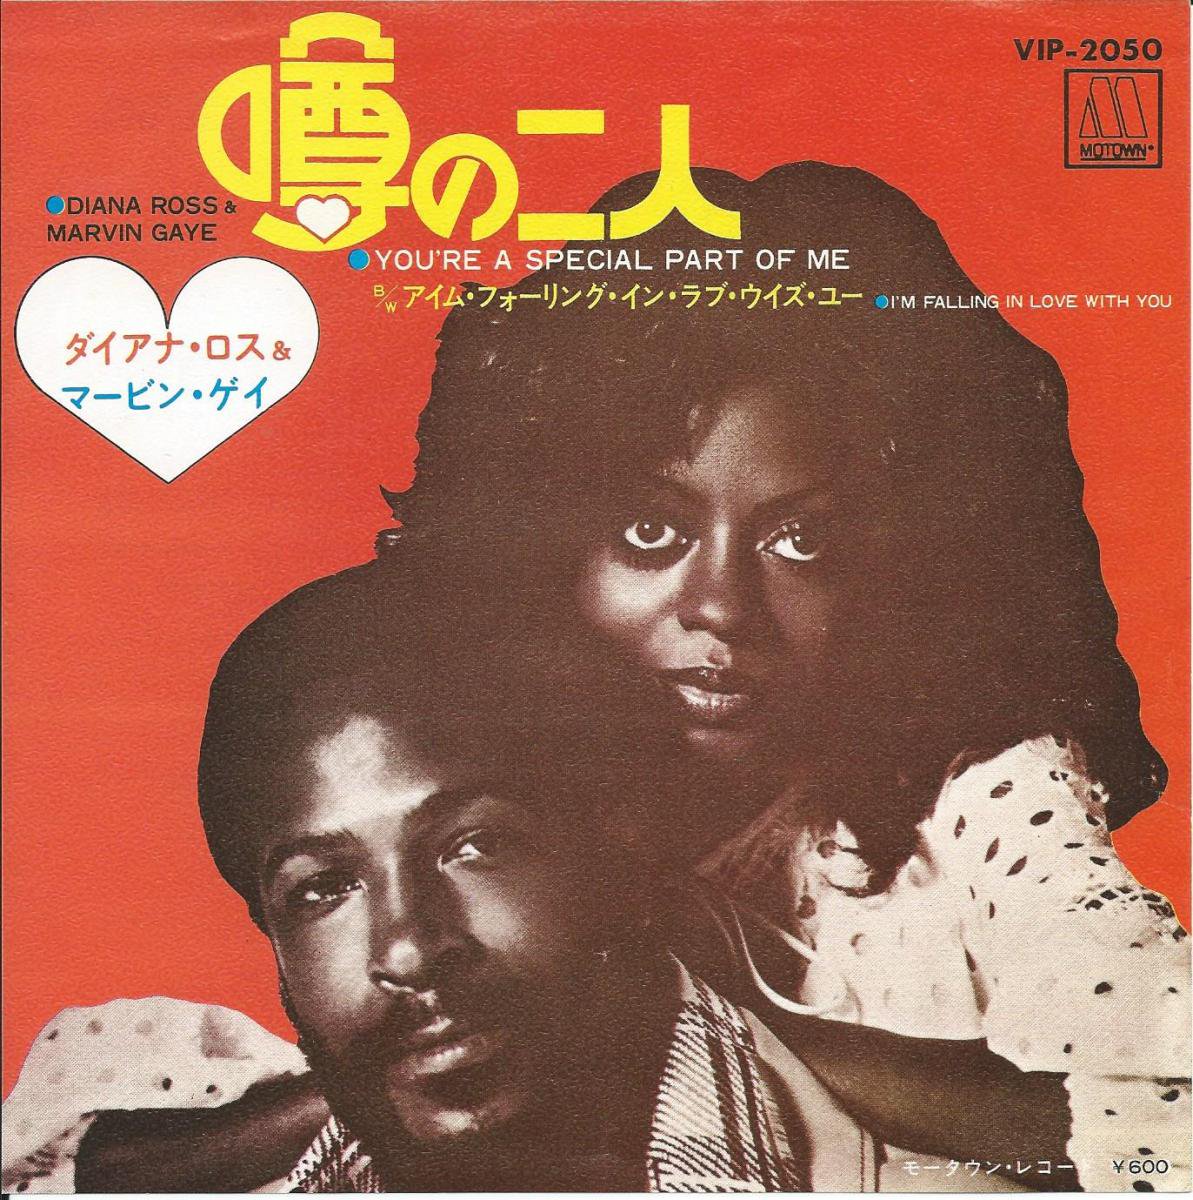 ʡ & ޡӥ󡦥 DIANA ROSS & MARVIN GAYE /  YOU'RE A SPECIAL PART OF ME (7